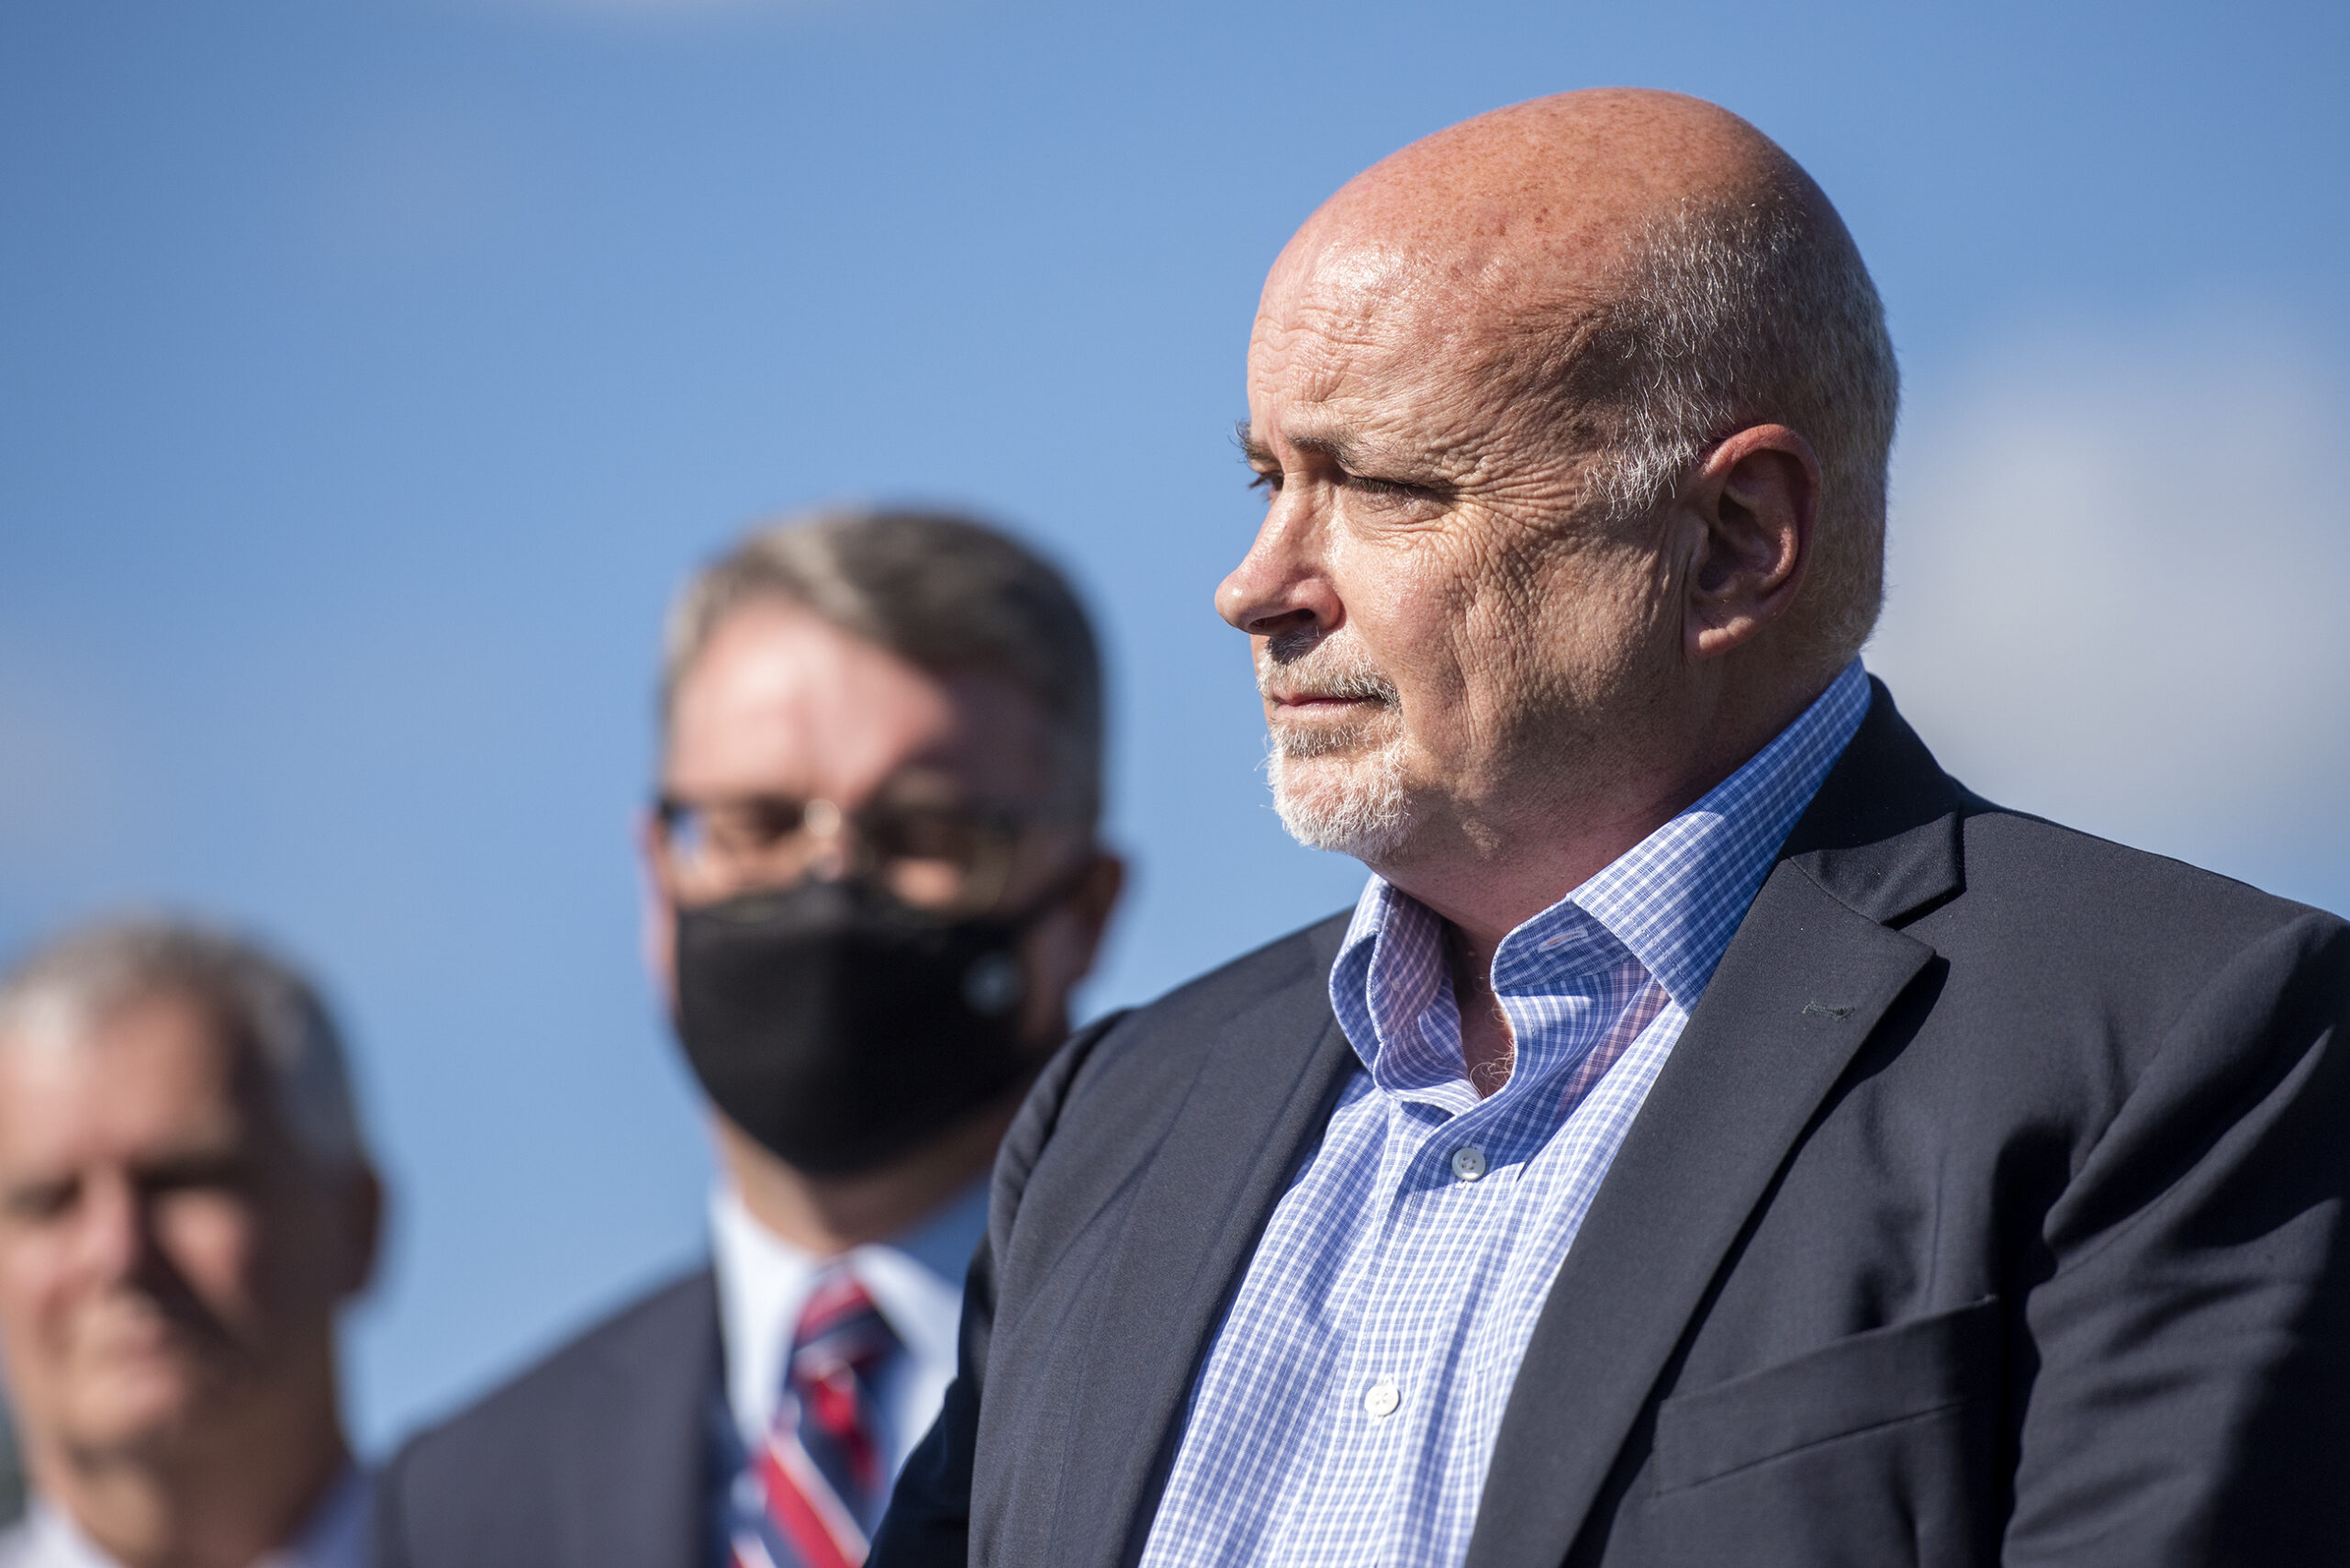 Rep. Pocan is backdropped by a blue sky as he looks toward someone speaking to reporters.